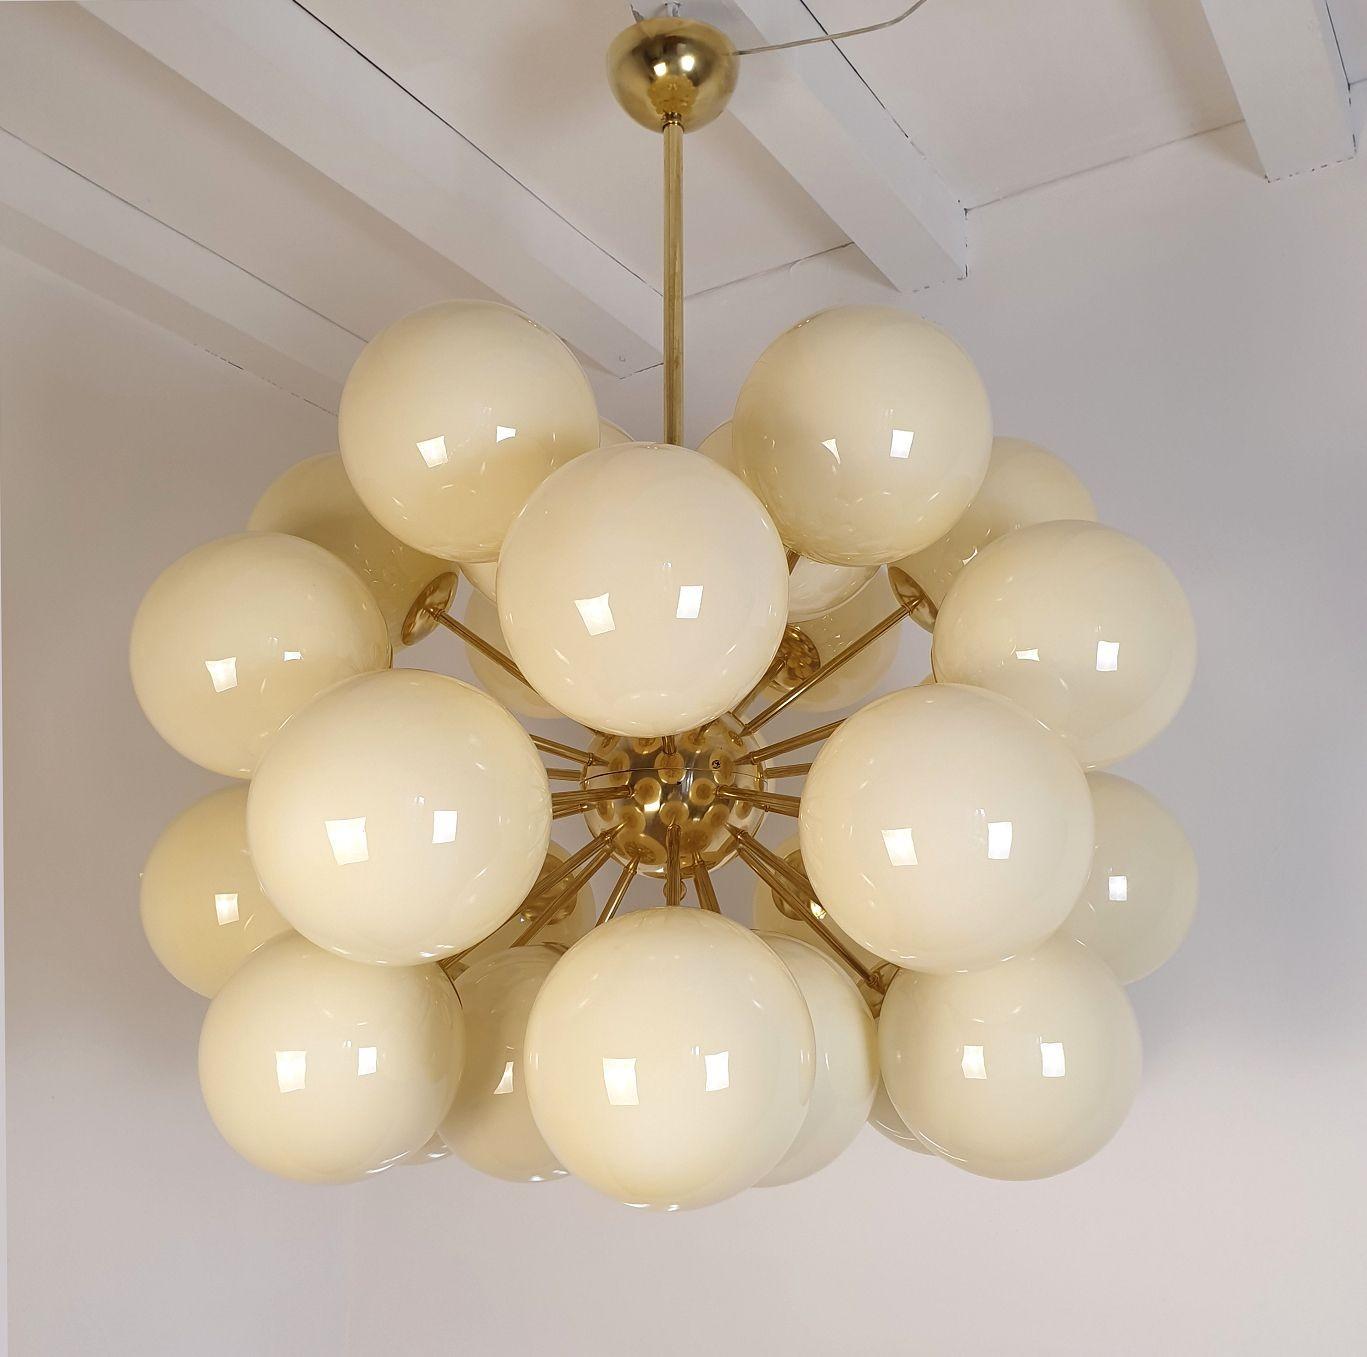 Very large Mid-Century Modern Beige Murano globes Sputnik chandelier, Italy circa 1990s.
The huge chandelier is made of brass mounts and 30 Murano glass globes, each nesting one light.
The glasses are translucent, in a pale amber or beige color.
The